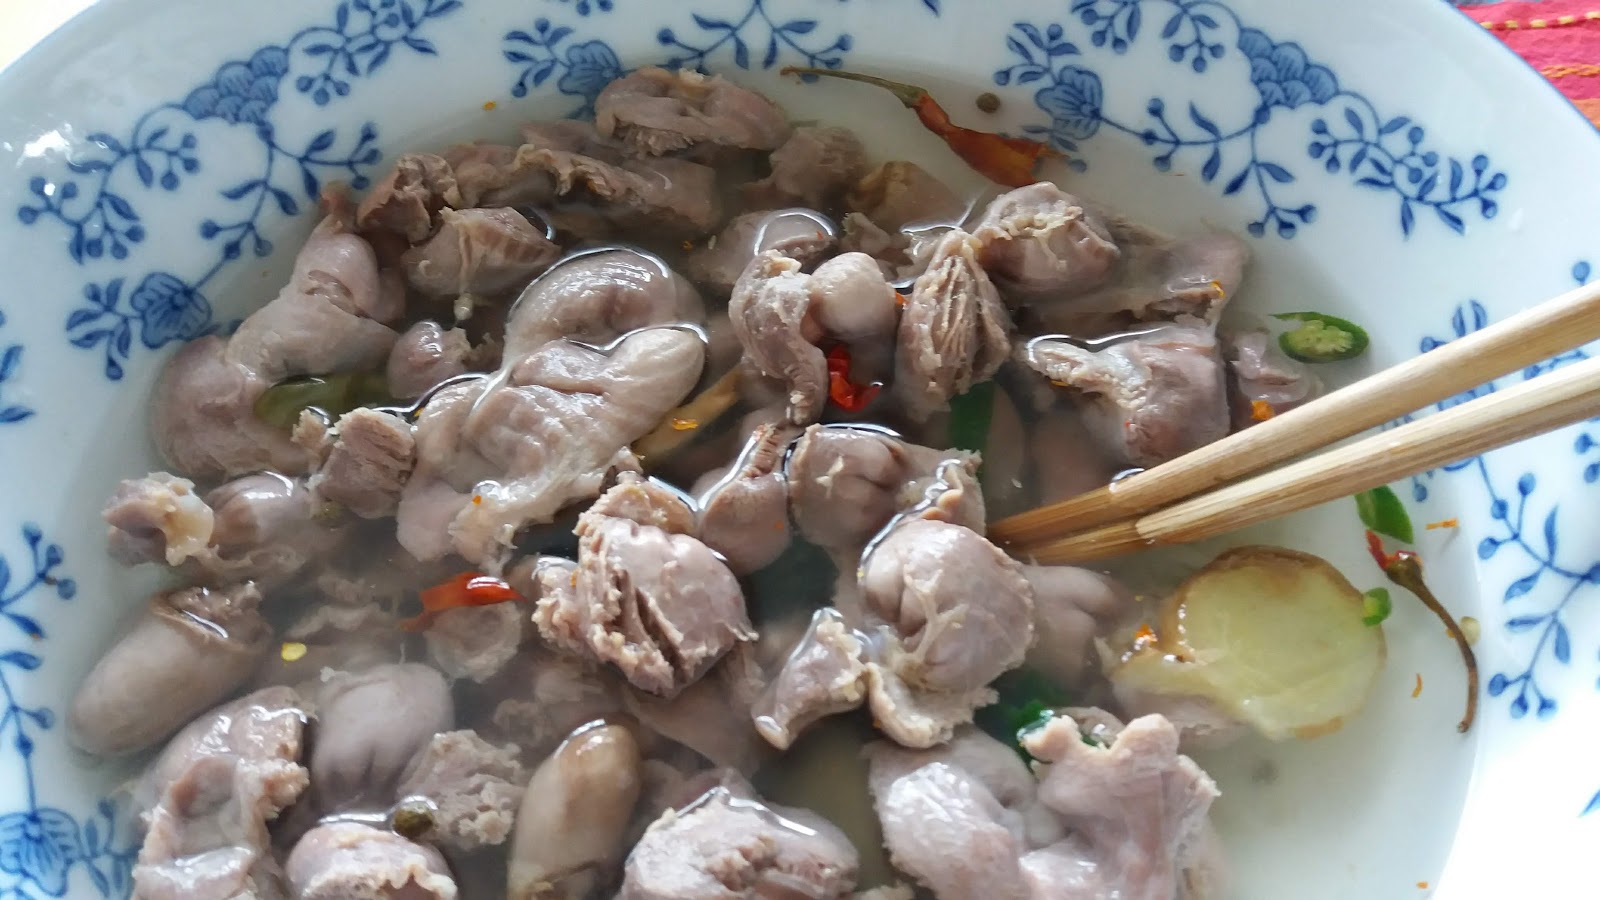 Fun Chinese Cooking Spring Tulip S Recipes Pickled Spicy Chicken Gizzard And Heart Æ³¡æ¤é¸¡çé¸¡å¿